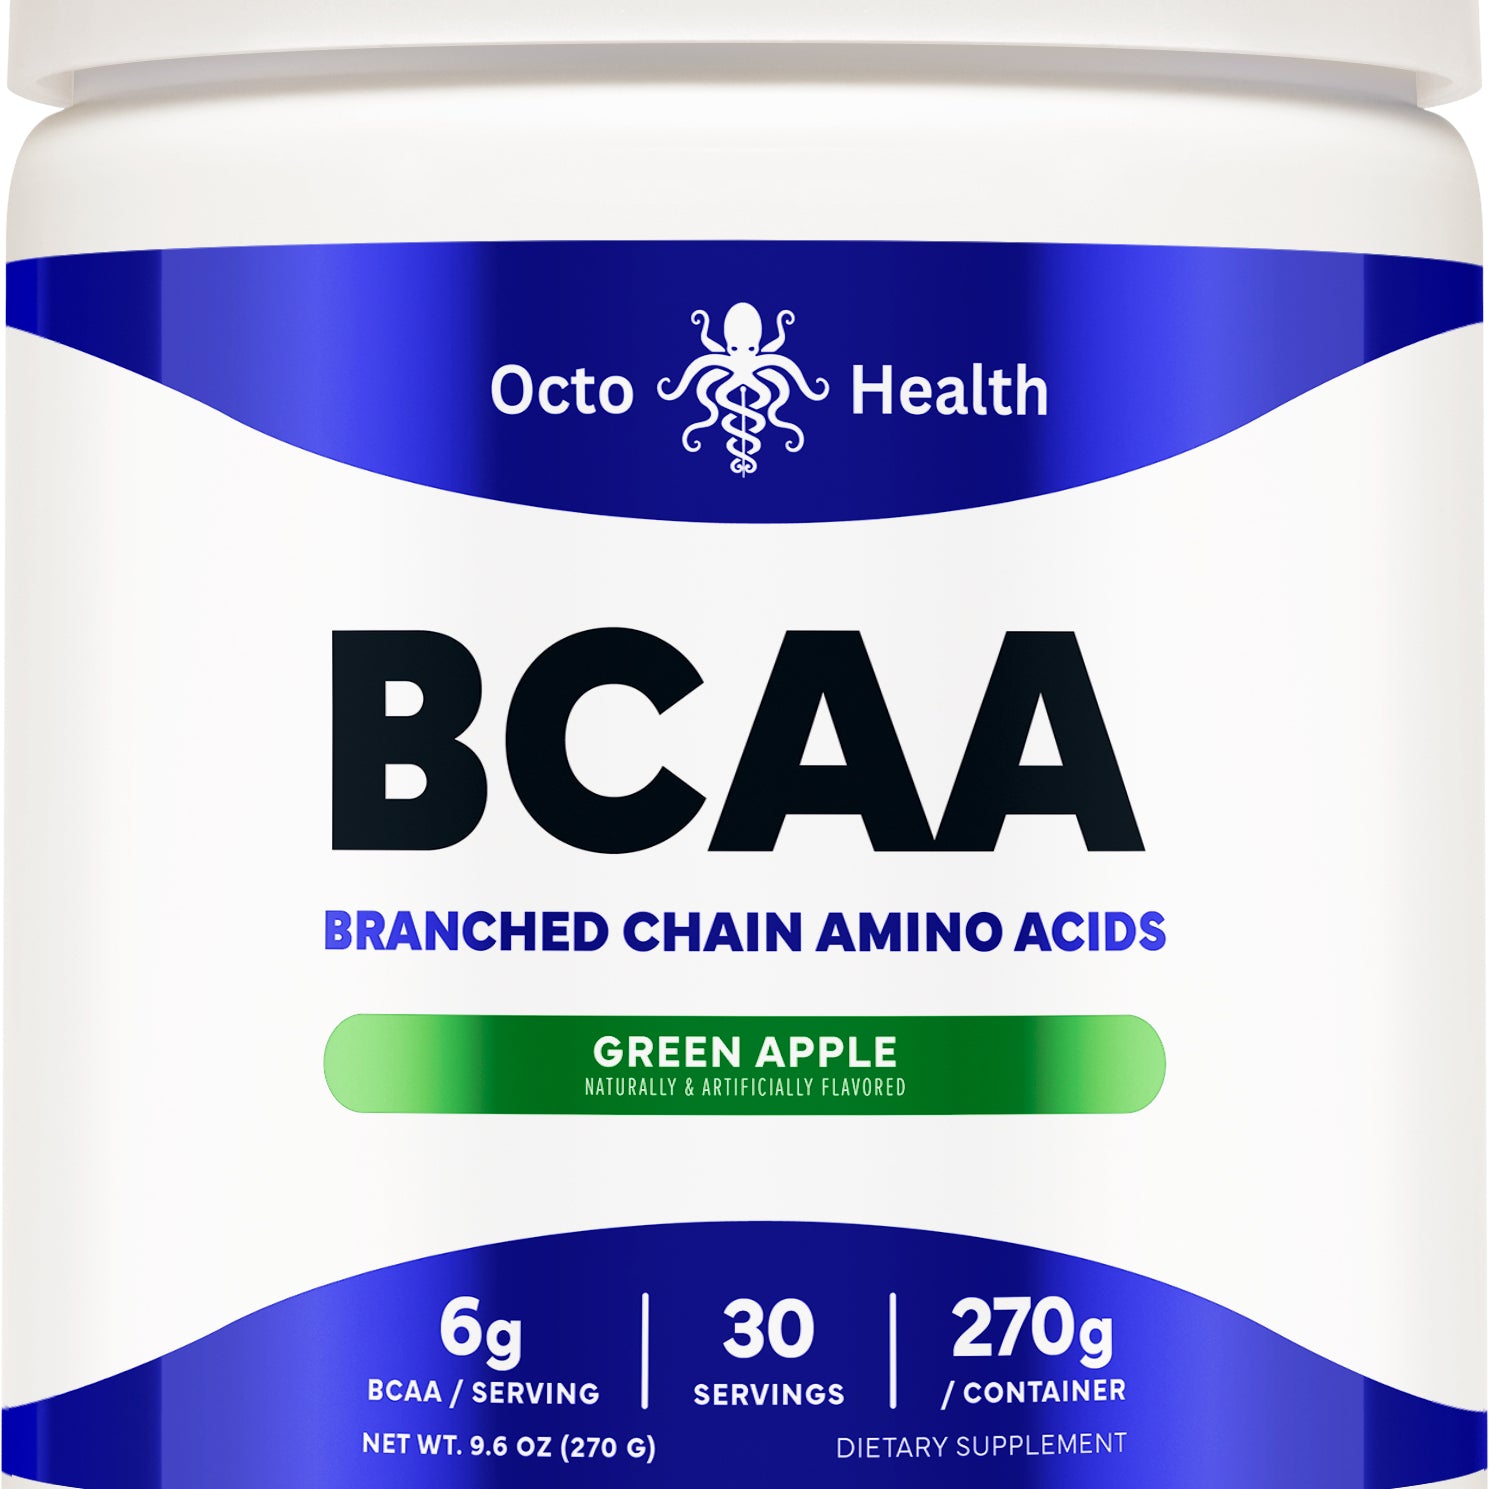 White Bottle with blue bands, stating BCAA- Branched Chain Amino Acids, Green Apple Flavor, 6g BCAA/serving, 30 servings, 270g / container, net wt 9.6 oz, Dietary Supplement